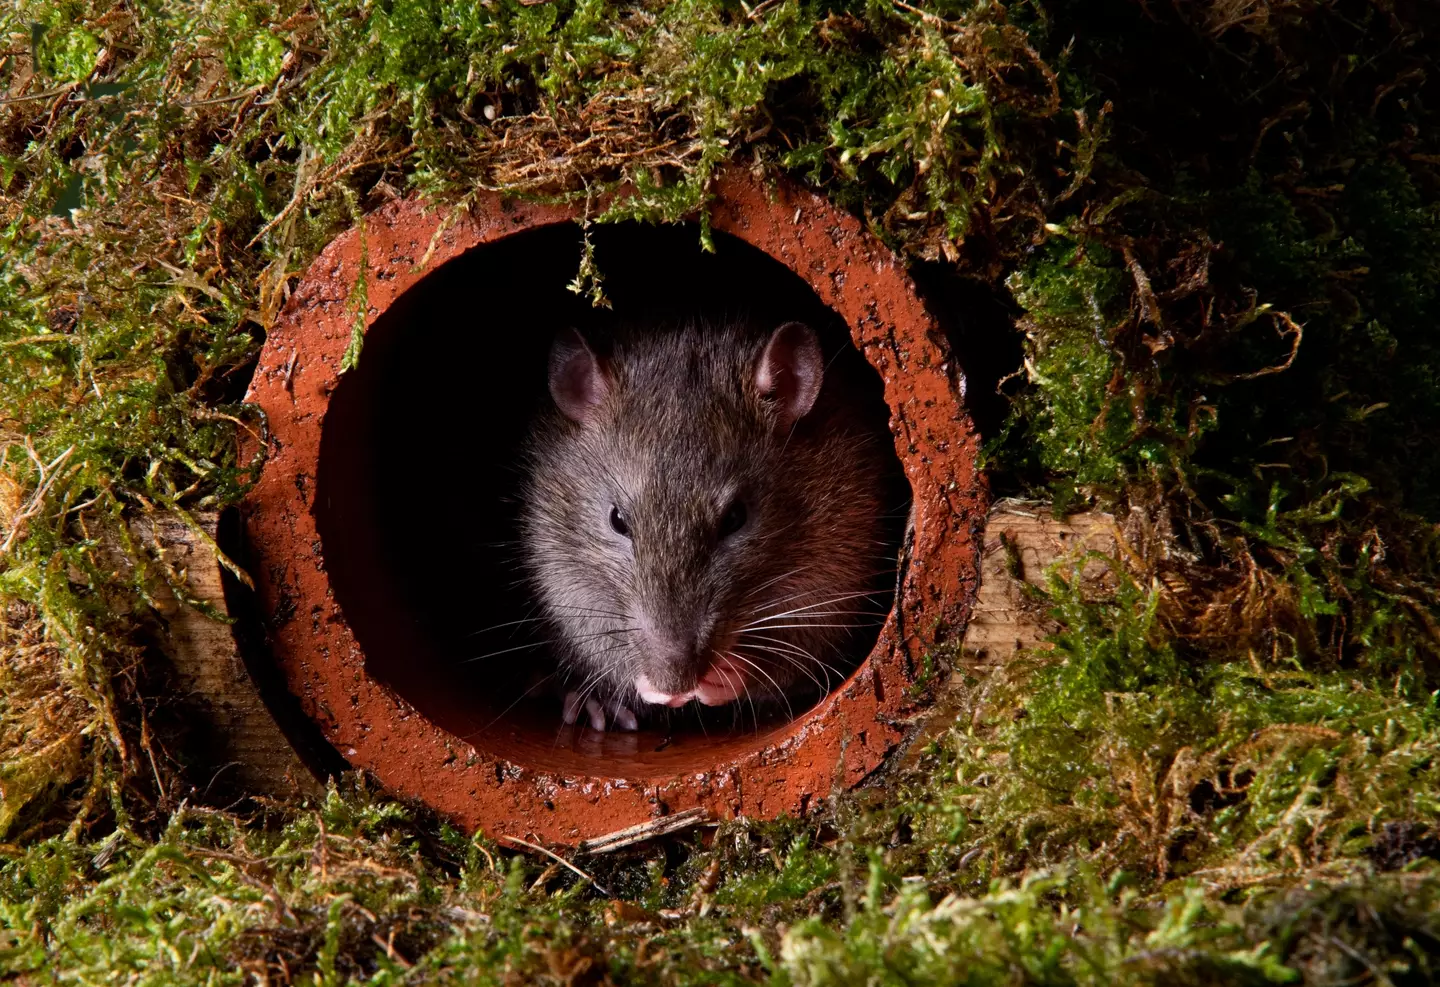 Rats may be looking to enter people's homes.